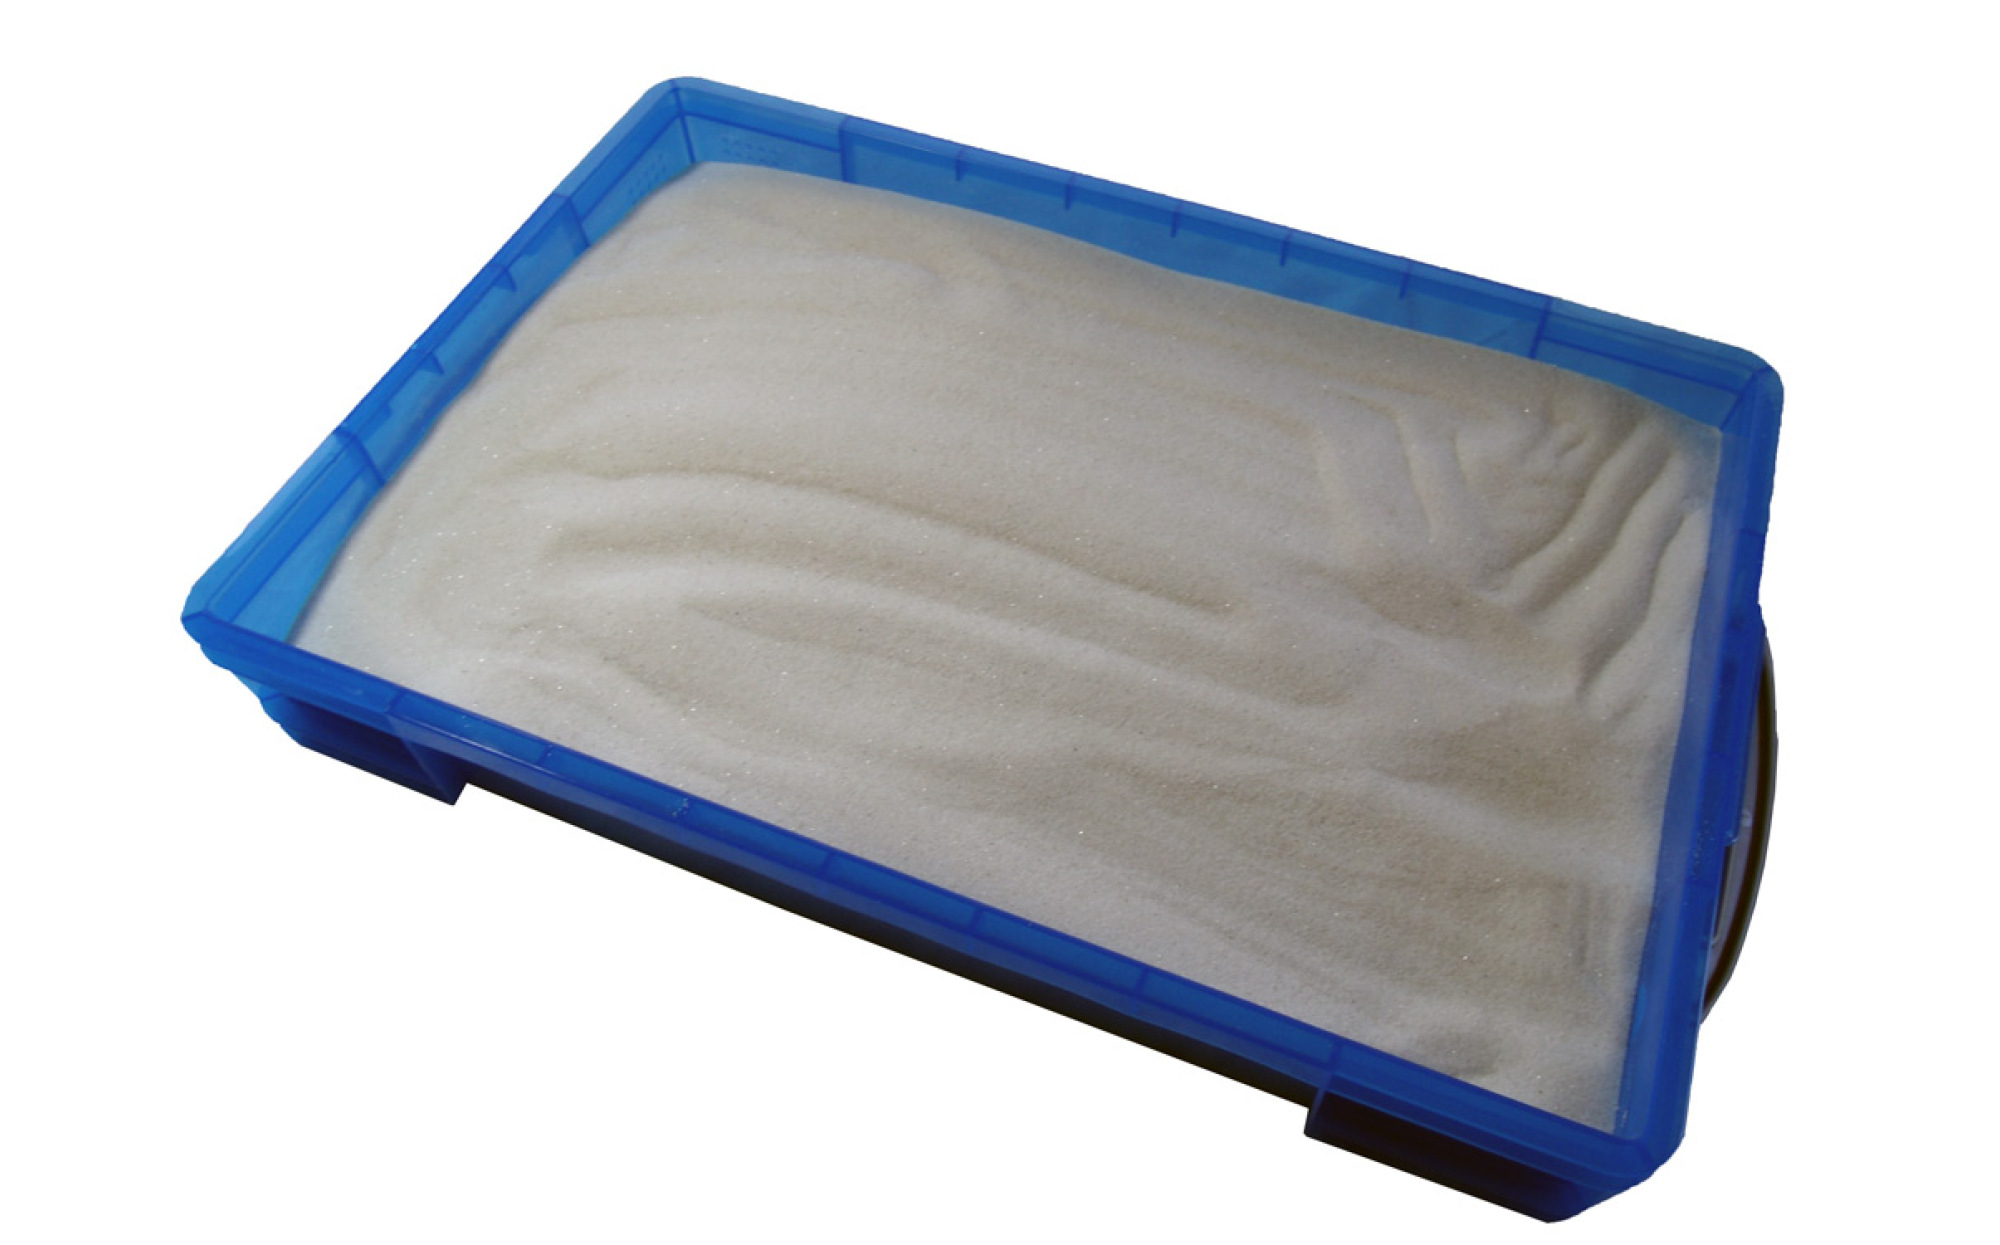 Full-sized Plastic Sand Tray with Lid